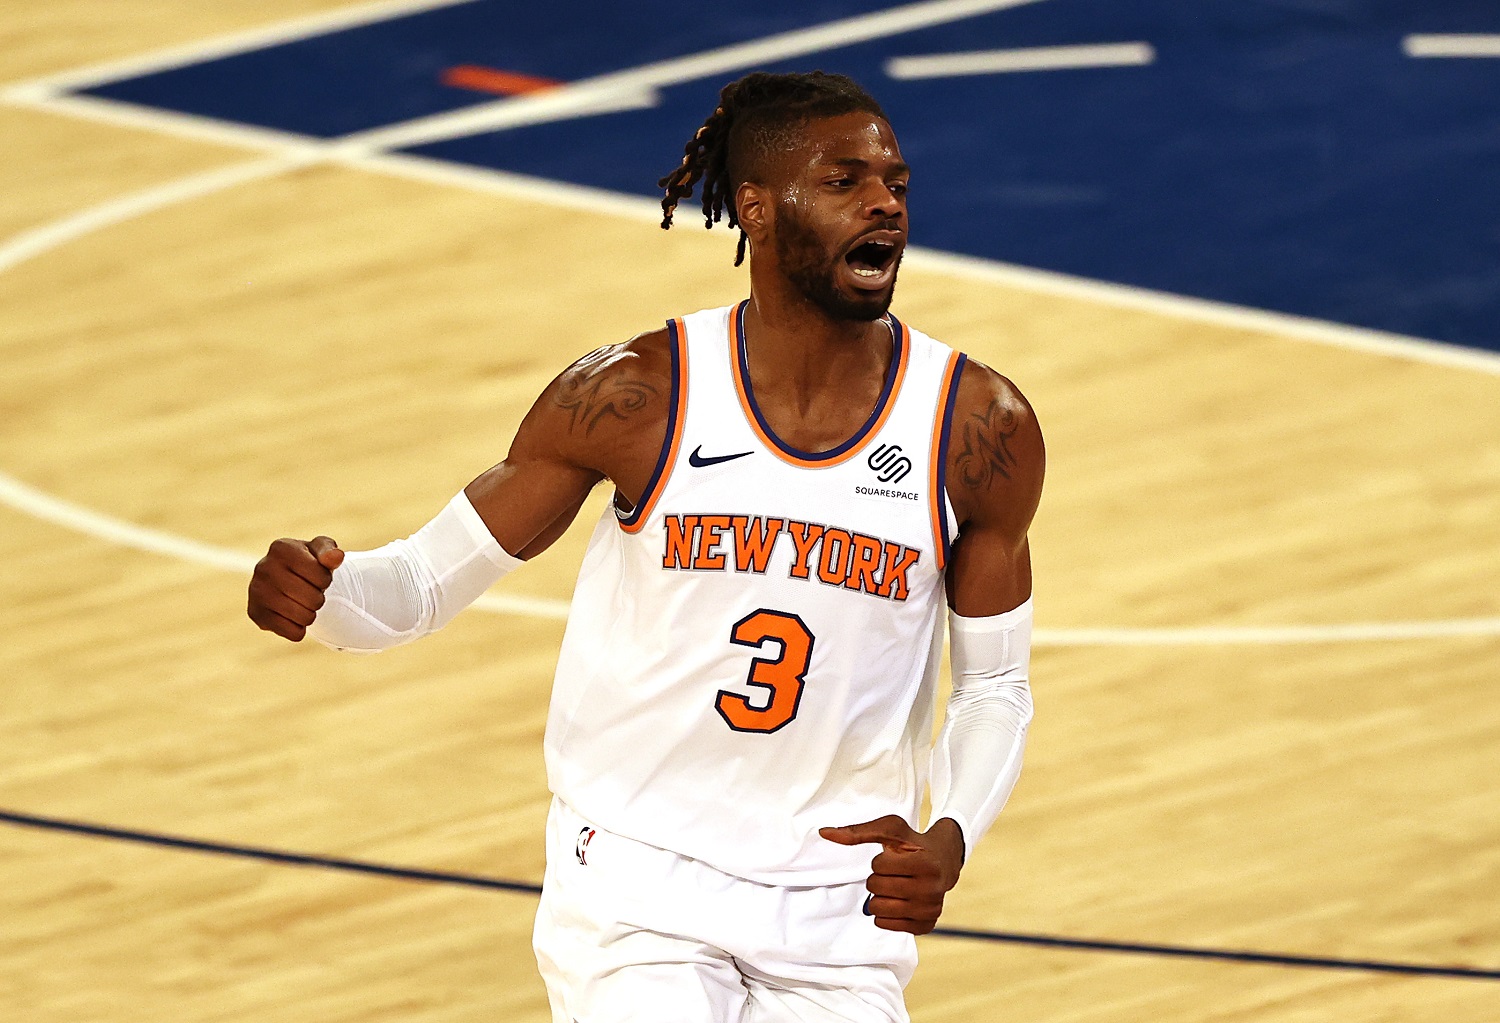 Knicks Center Nerlens Noel’s Injured Thumb Cost Him $58 Million, but His Fingers Still Work … and He’s Flipping 1 at His Ex-Agent